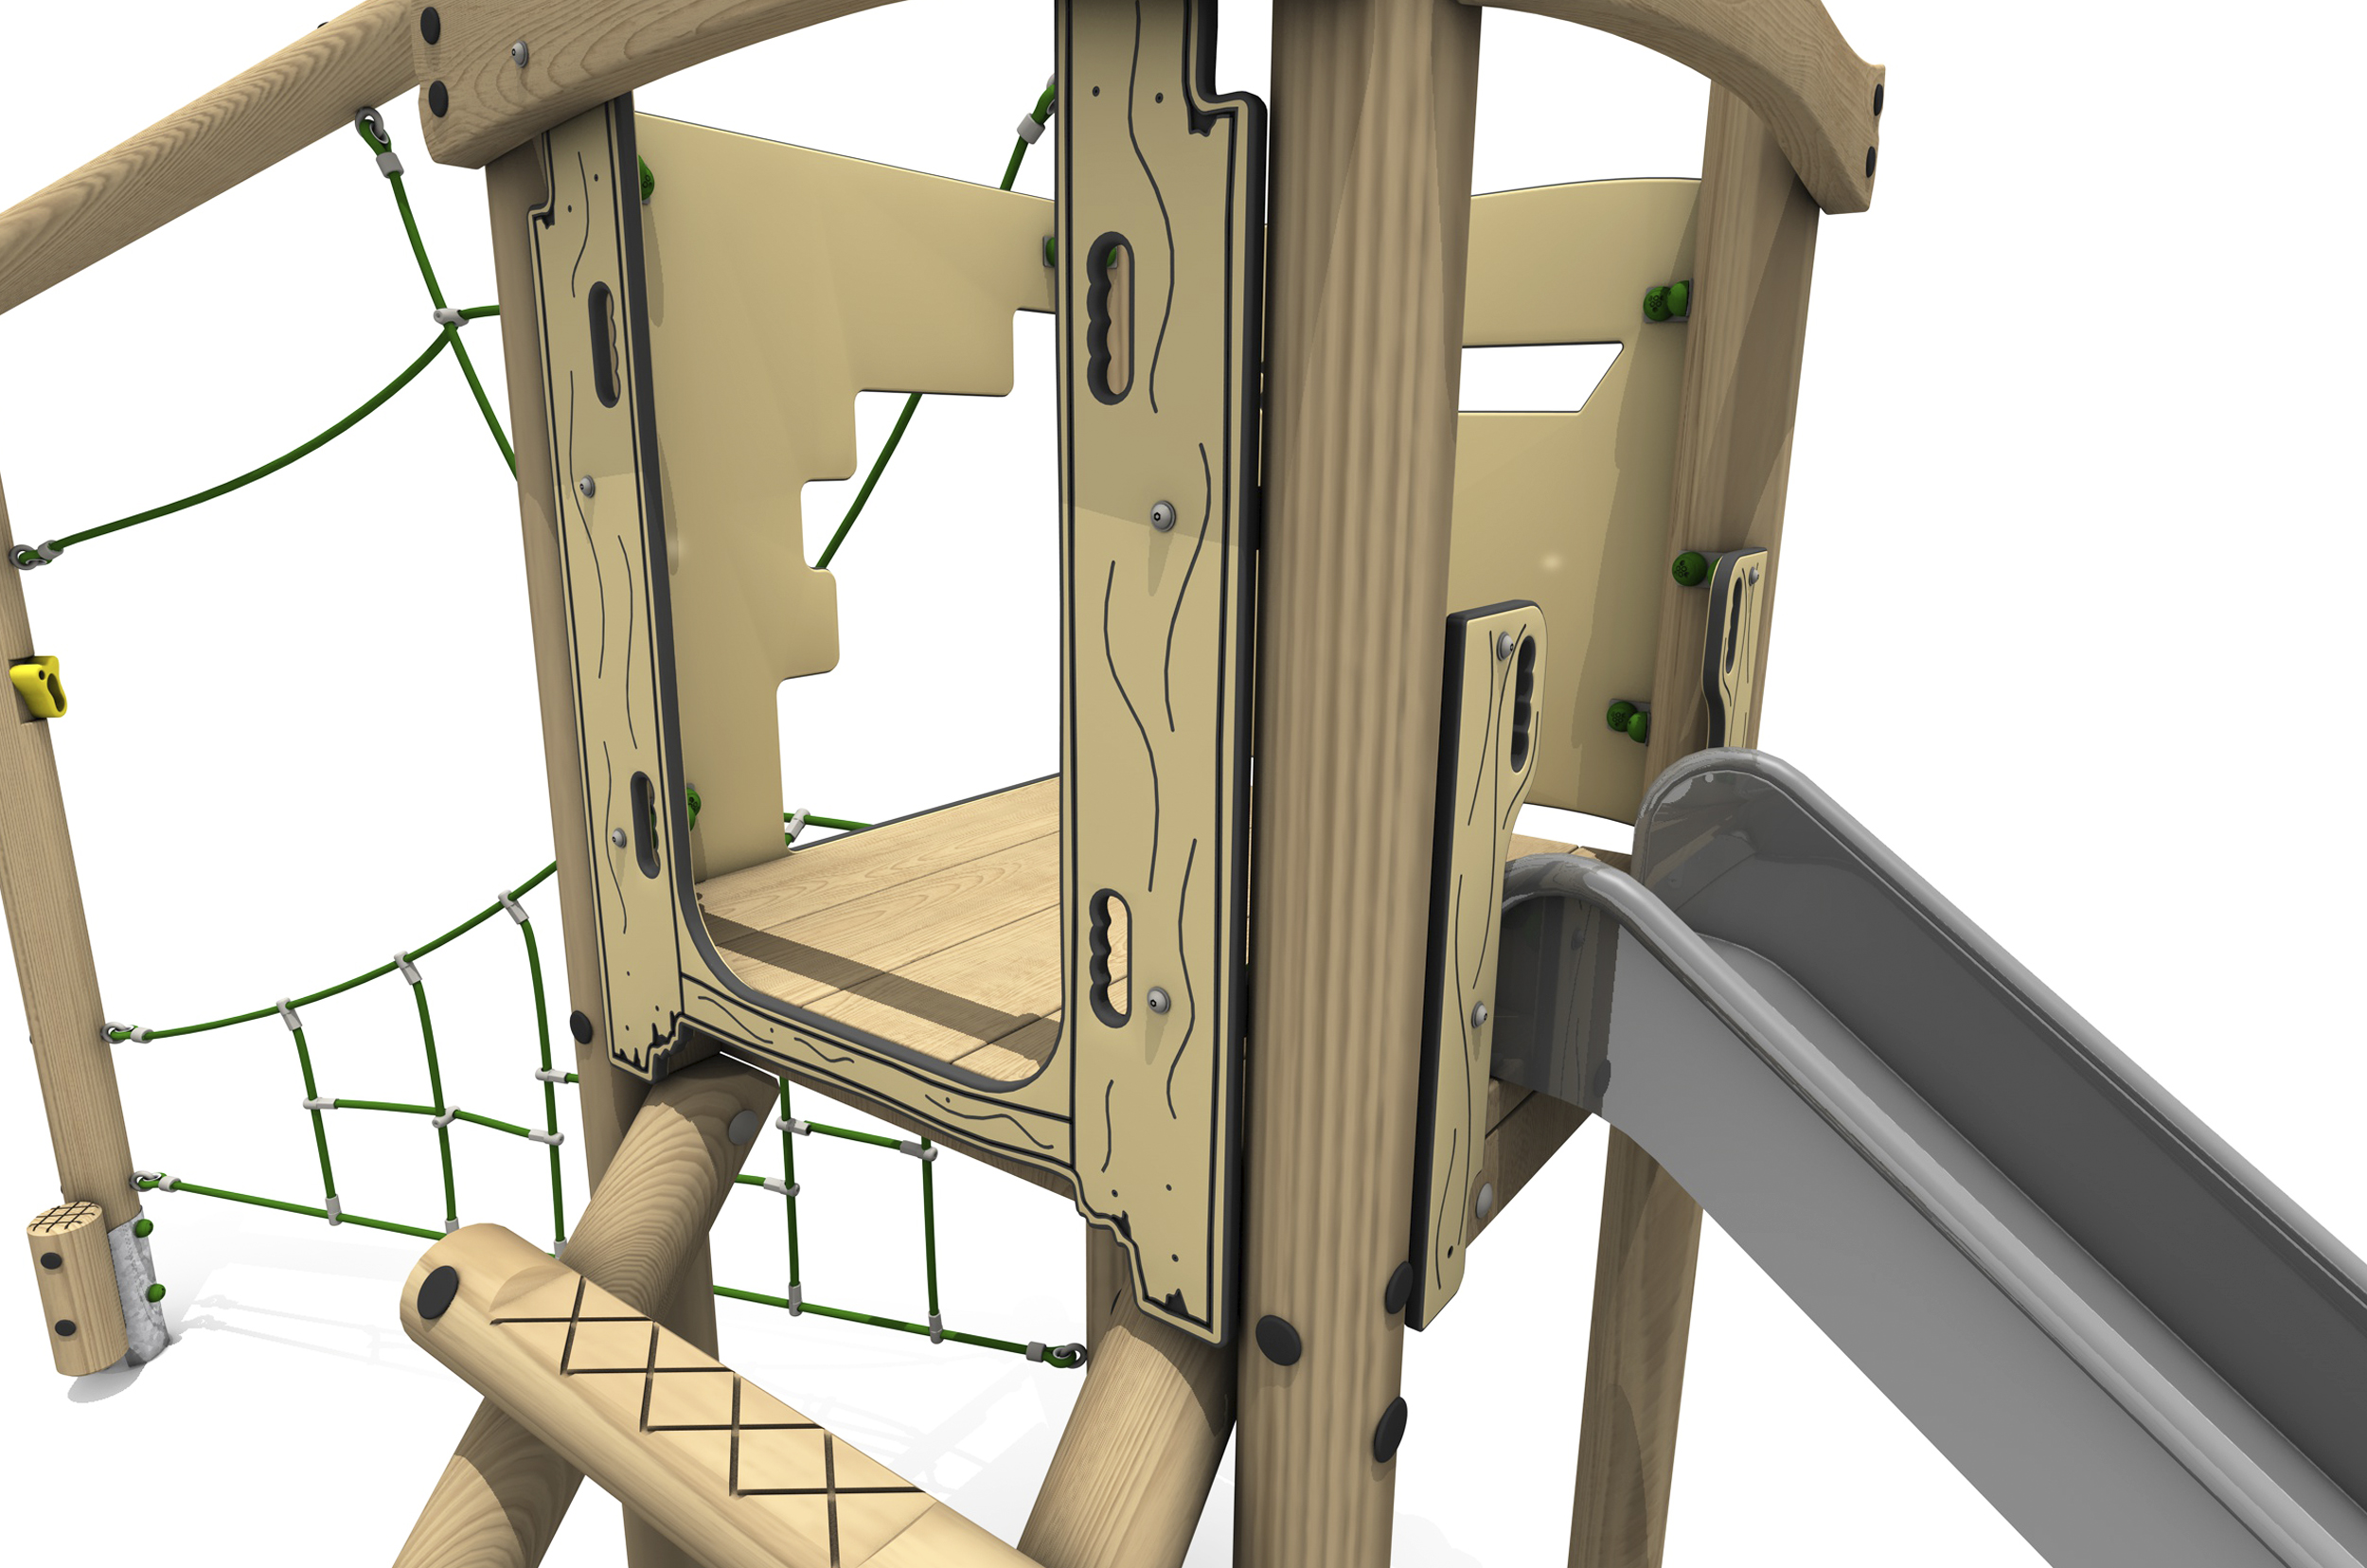 Timber Tower Single Deck 04, A timber tower climber platform where children access the steel slide. the platform is accessed the log ladder on the left side